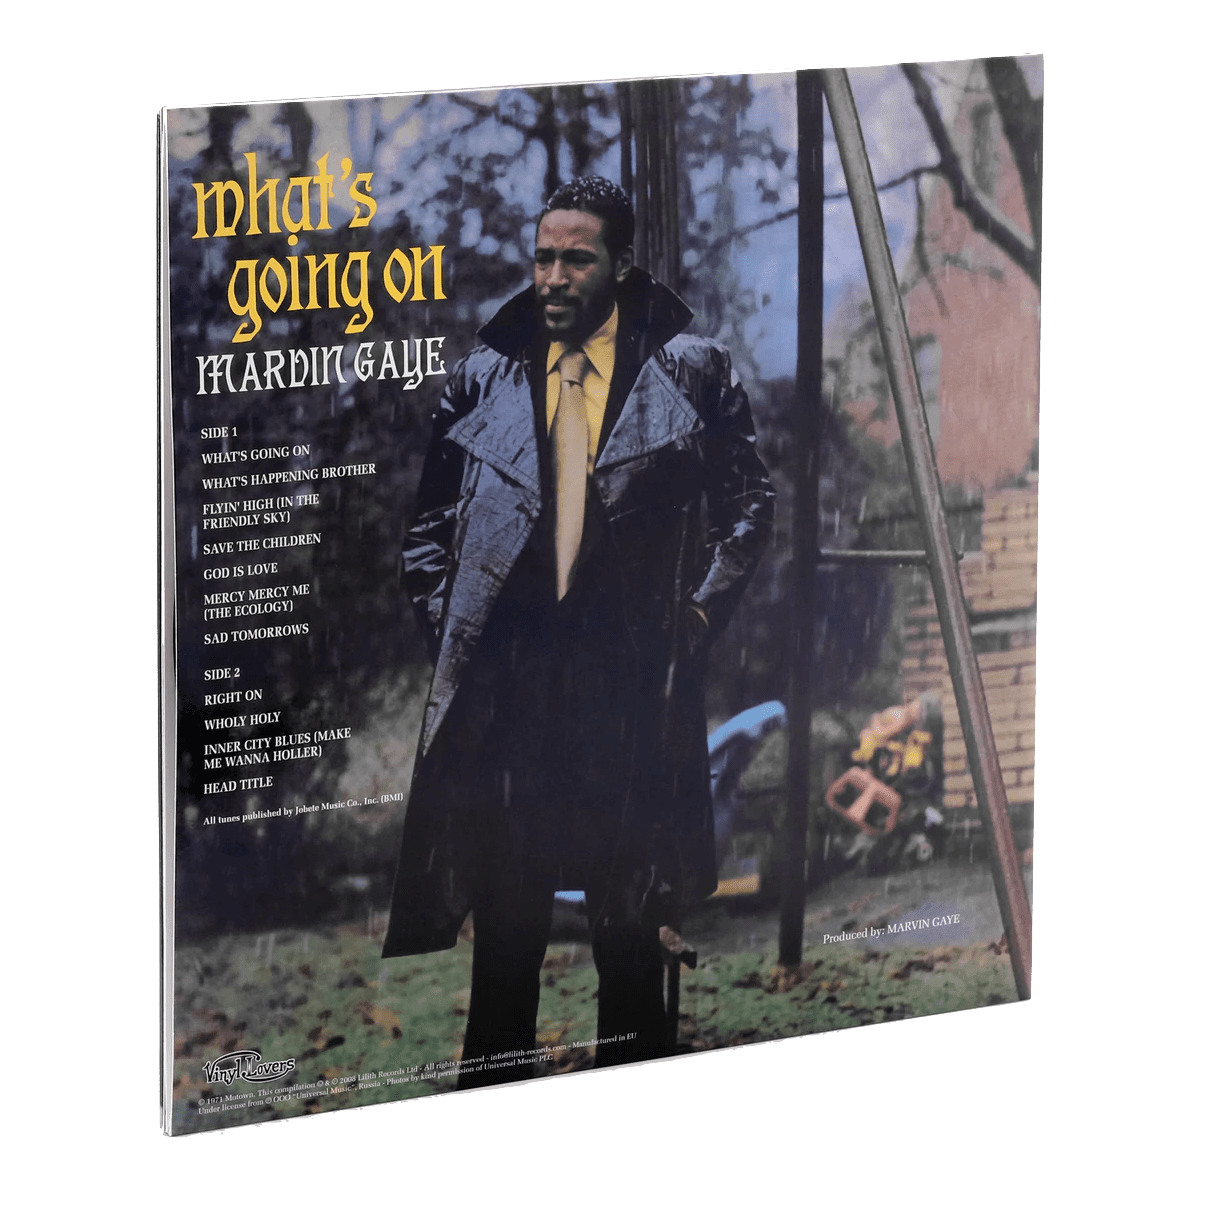 Marvin Gaye - What's Going On (Limited Edition Import, Gatefold, Remastered, 180 Gram, Swamp Green Vinyl) (LP) - Joco Records